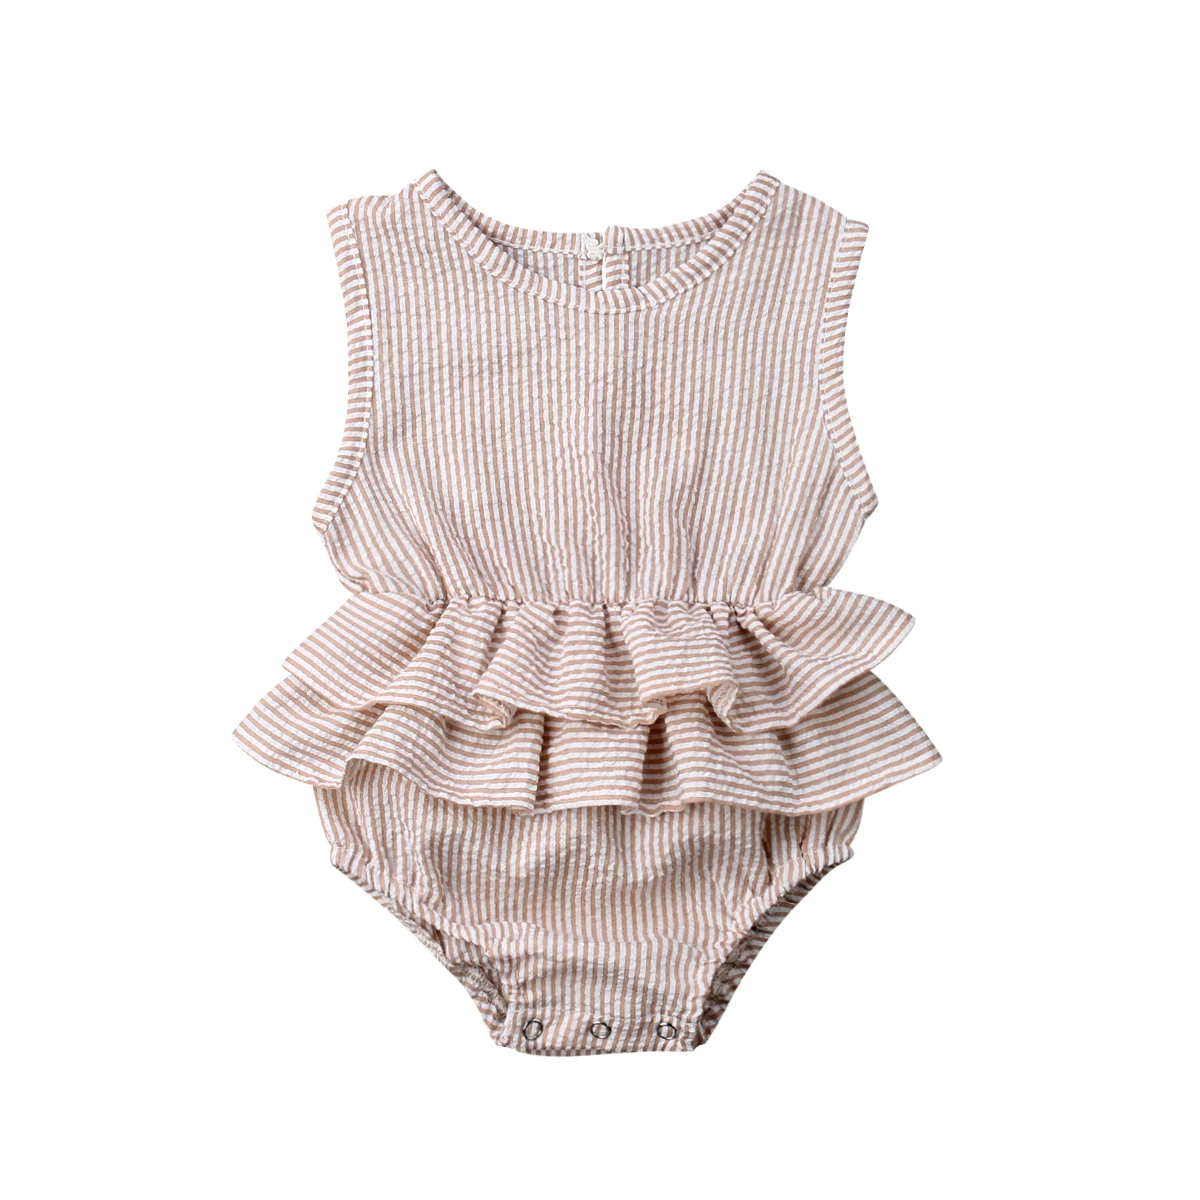 Toddler Newborn Infant Baby Girls Ruffle Romper Bodysuit Jumpsuit Solid Color Cotton One-Piece Outfits Clothes 